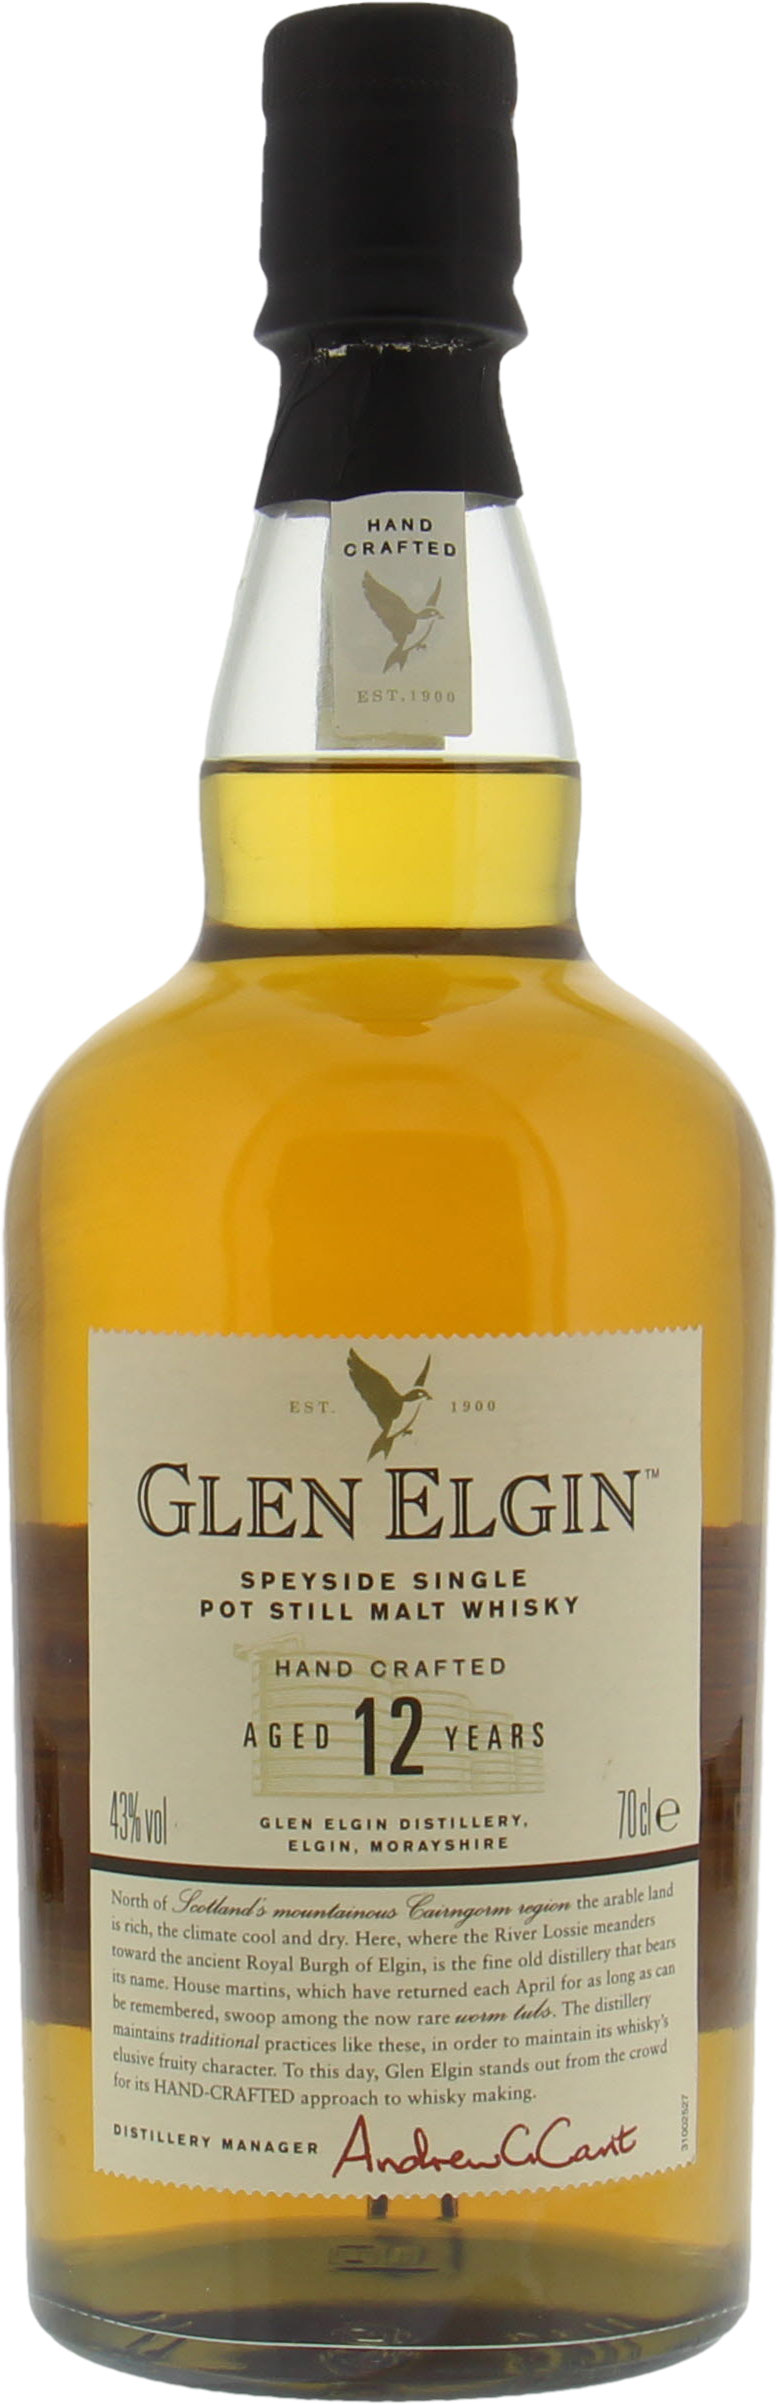 Glen Elgin - 12 Years Old 43% NV No Original Container Included